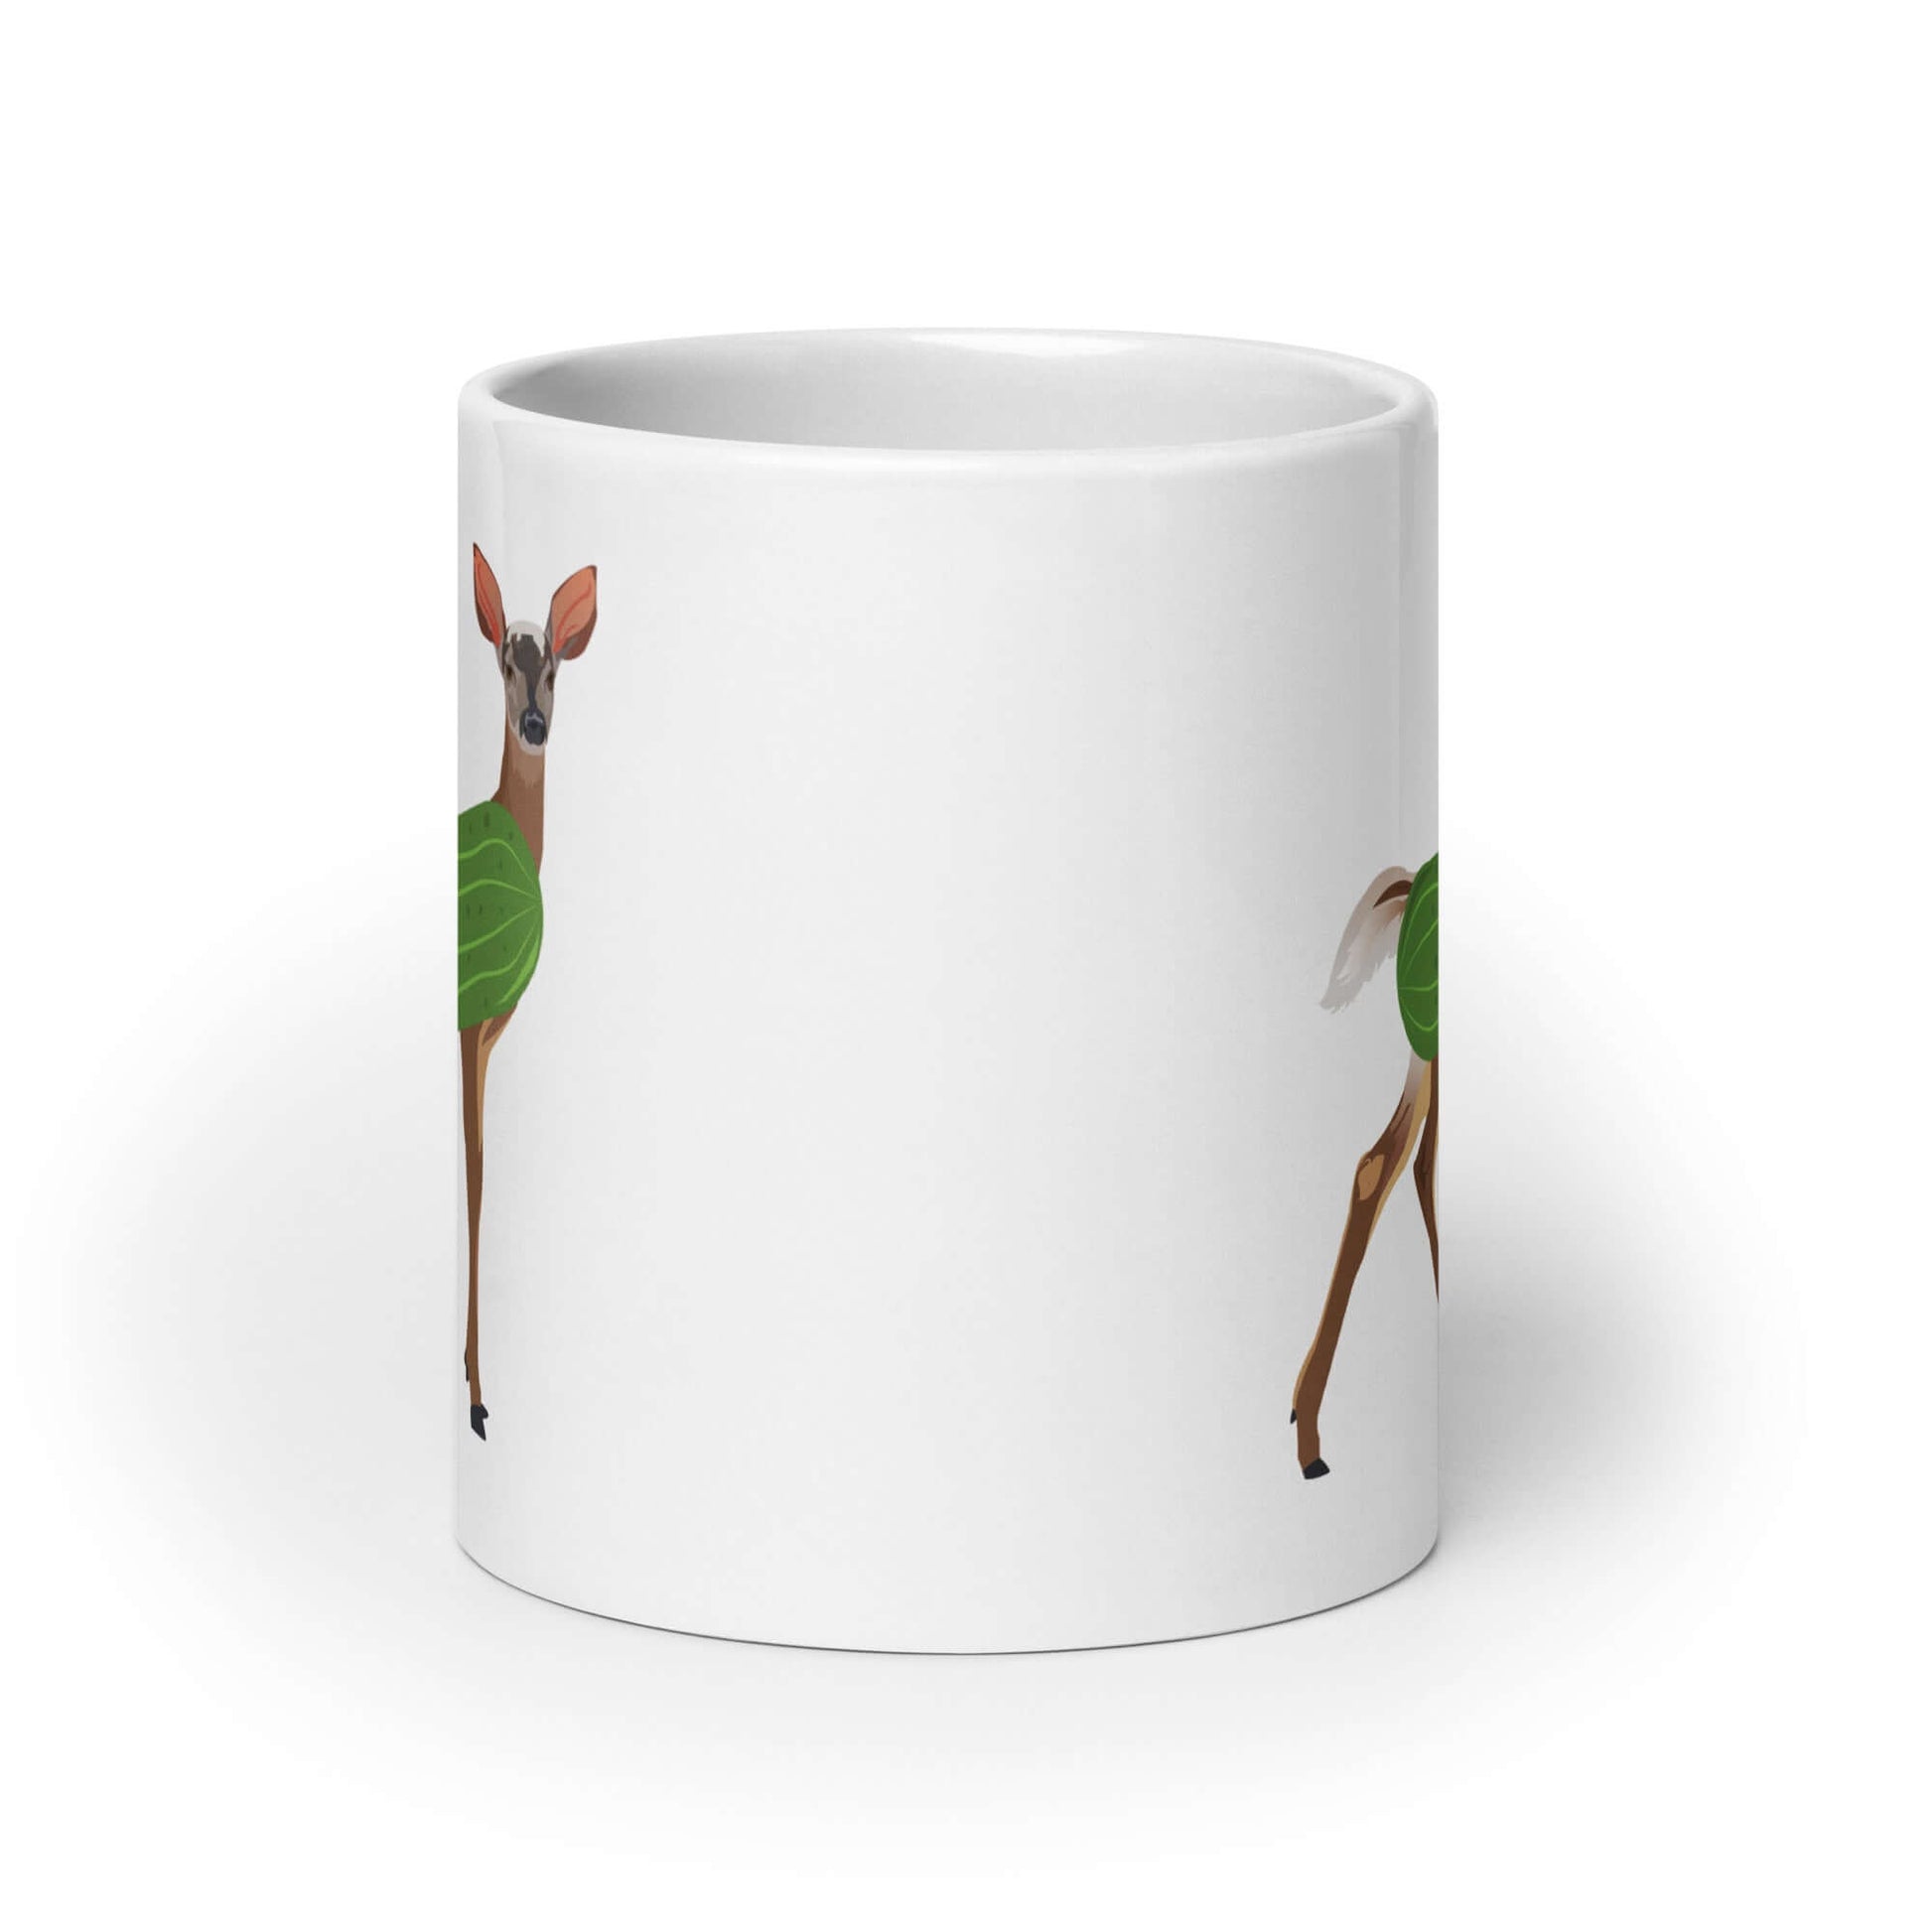 White ceramic dildo pun coffee mug with funny image of a doe deer with a dill pickle body printed on both sides of the mug.